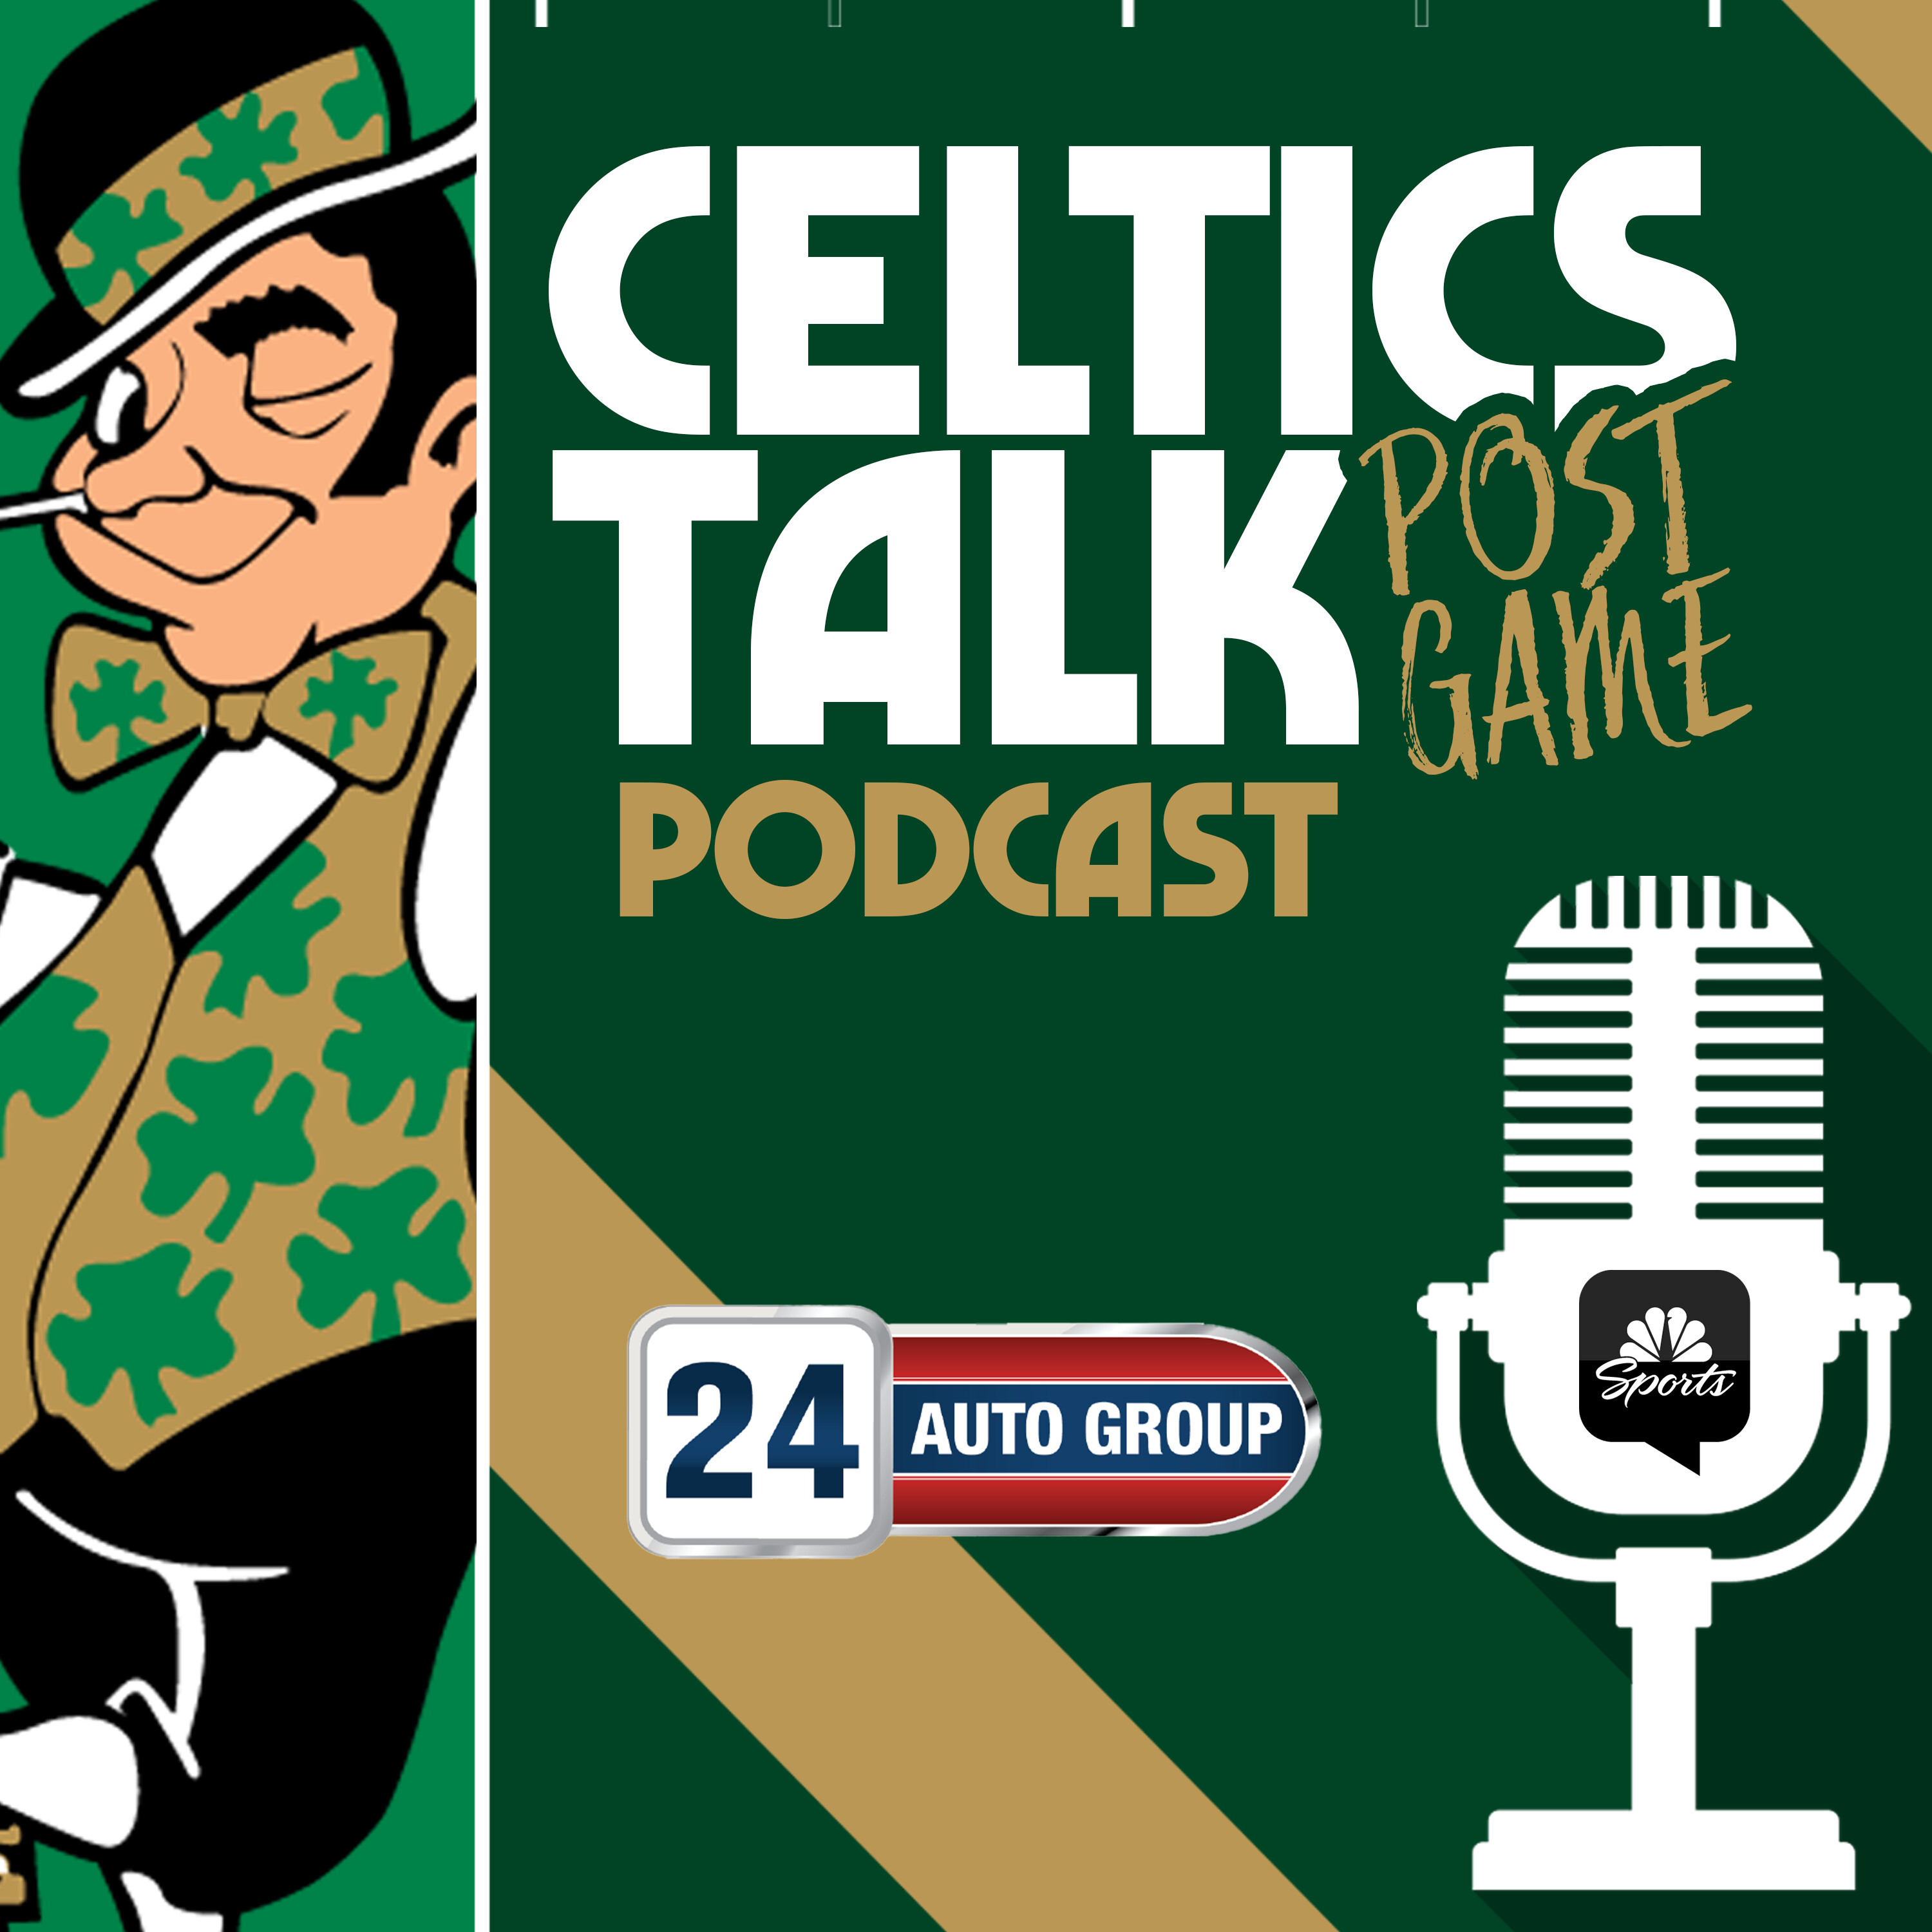 POSTGAME POD: 'Focused' Celtics 'impose their will' on Kings in bounce-back win